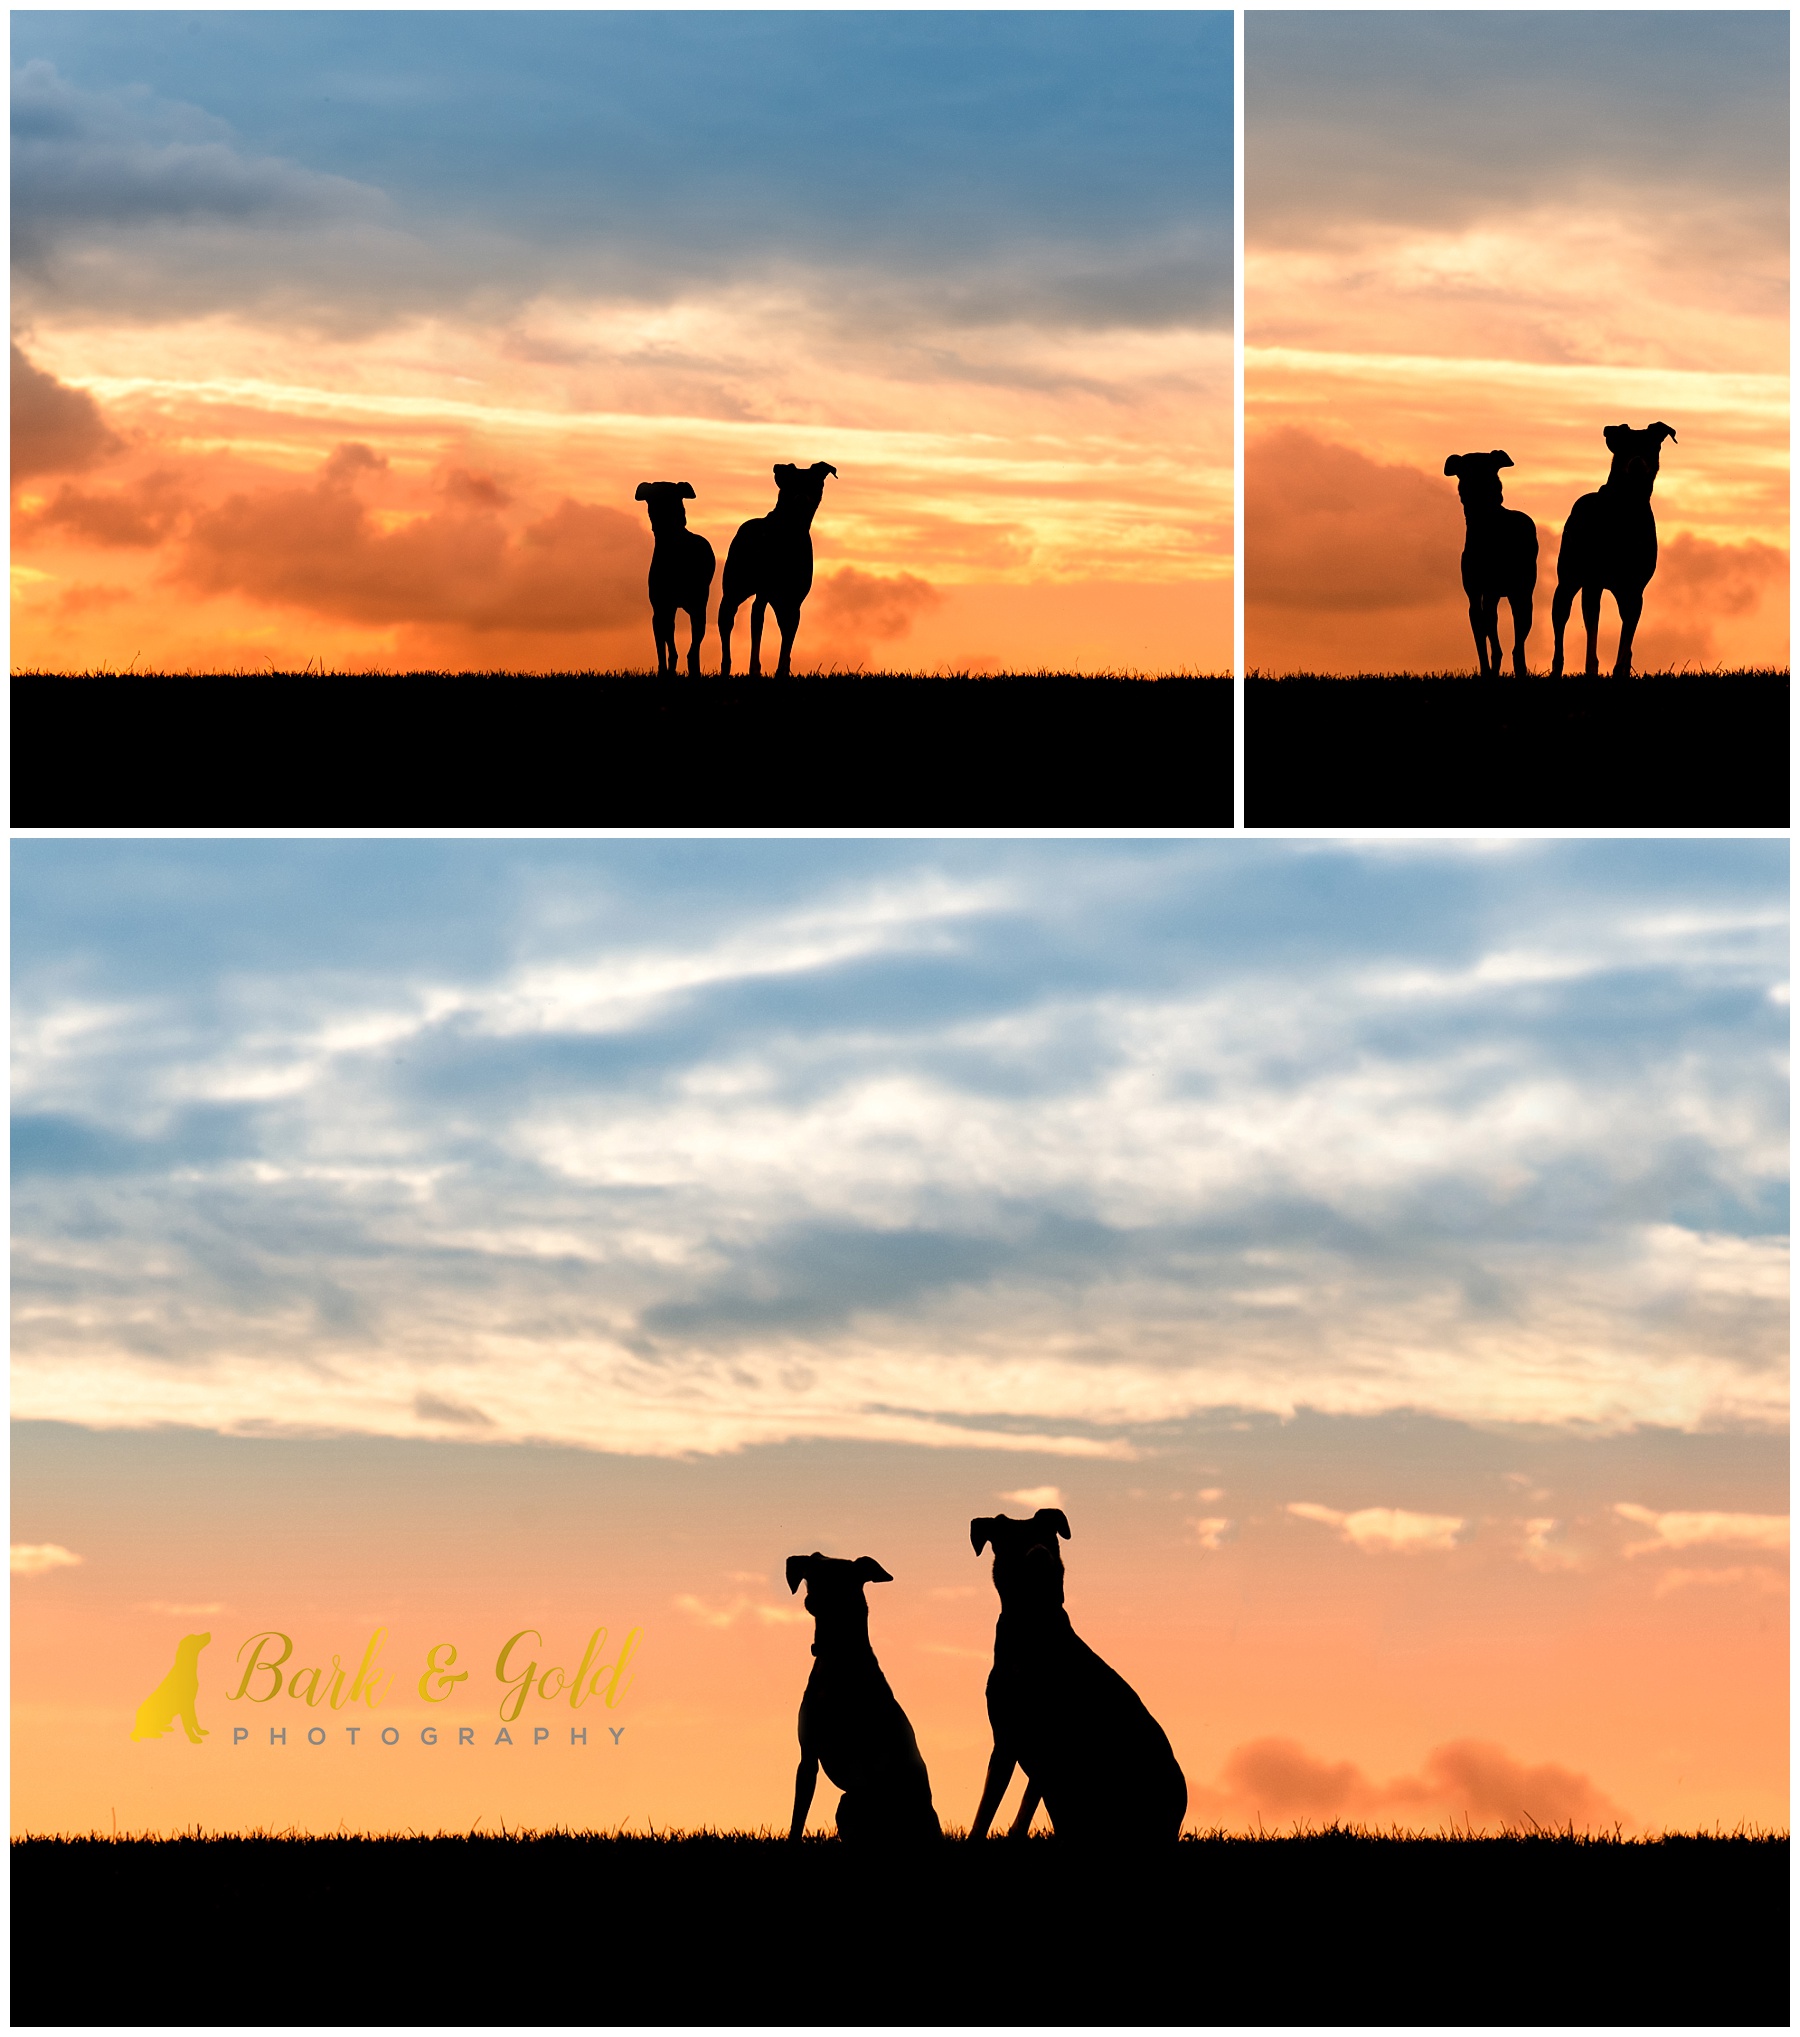 Italian Greyhounds against a sunset sky during a Silhouette Sunset Session near Pittsburgh